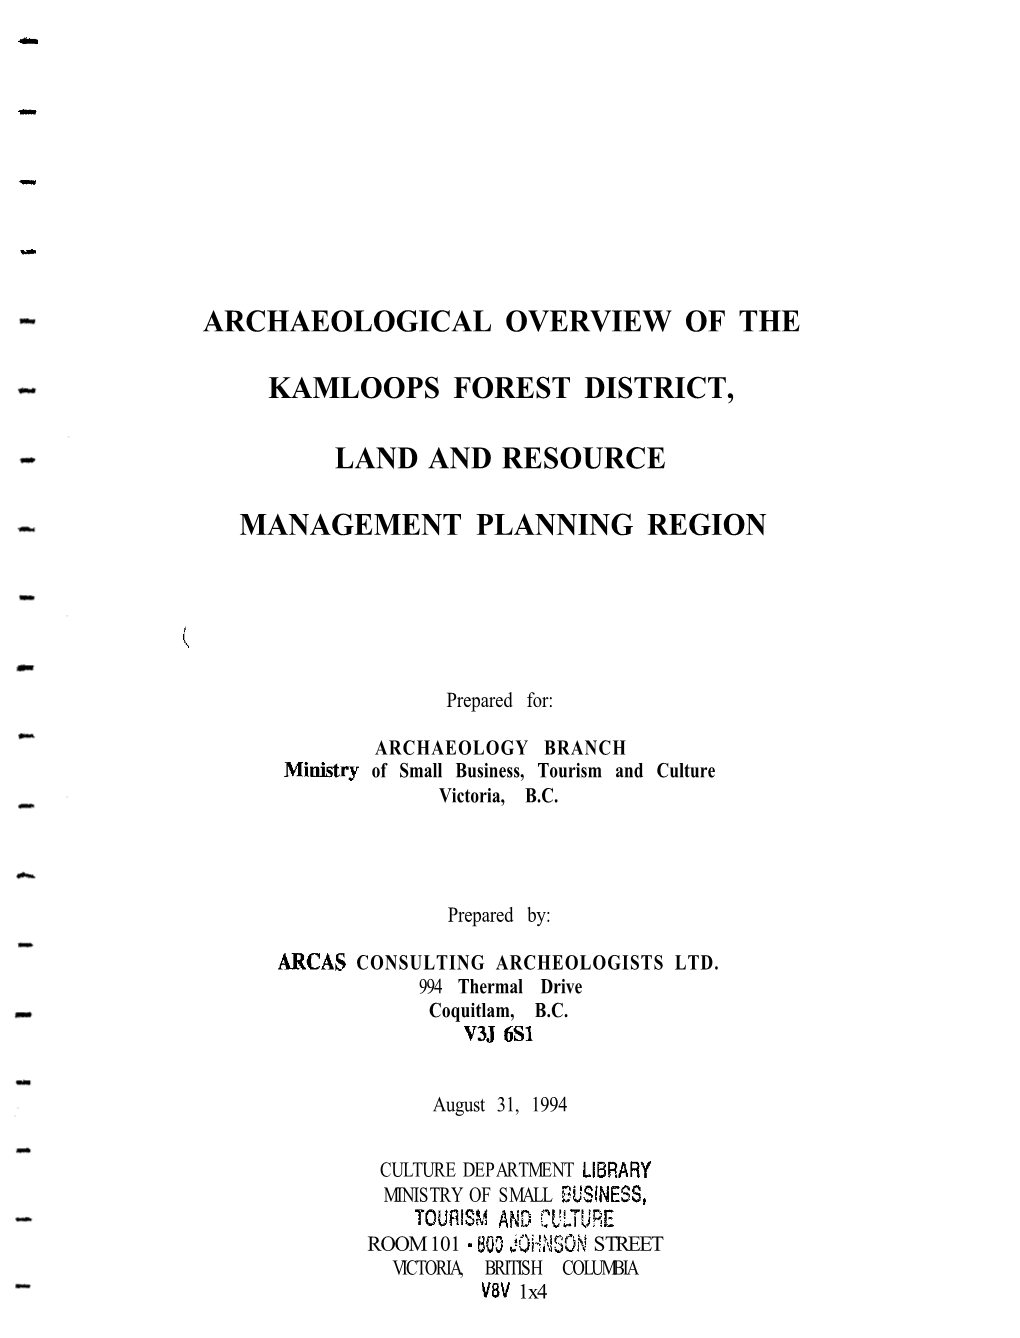 Archaeological Overview of the Kamloops Forest District, Land and Resource Management Planning (LRMP) Region